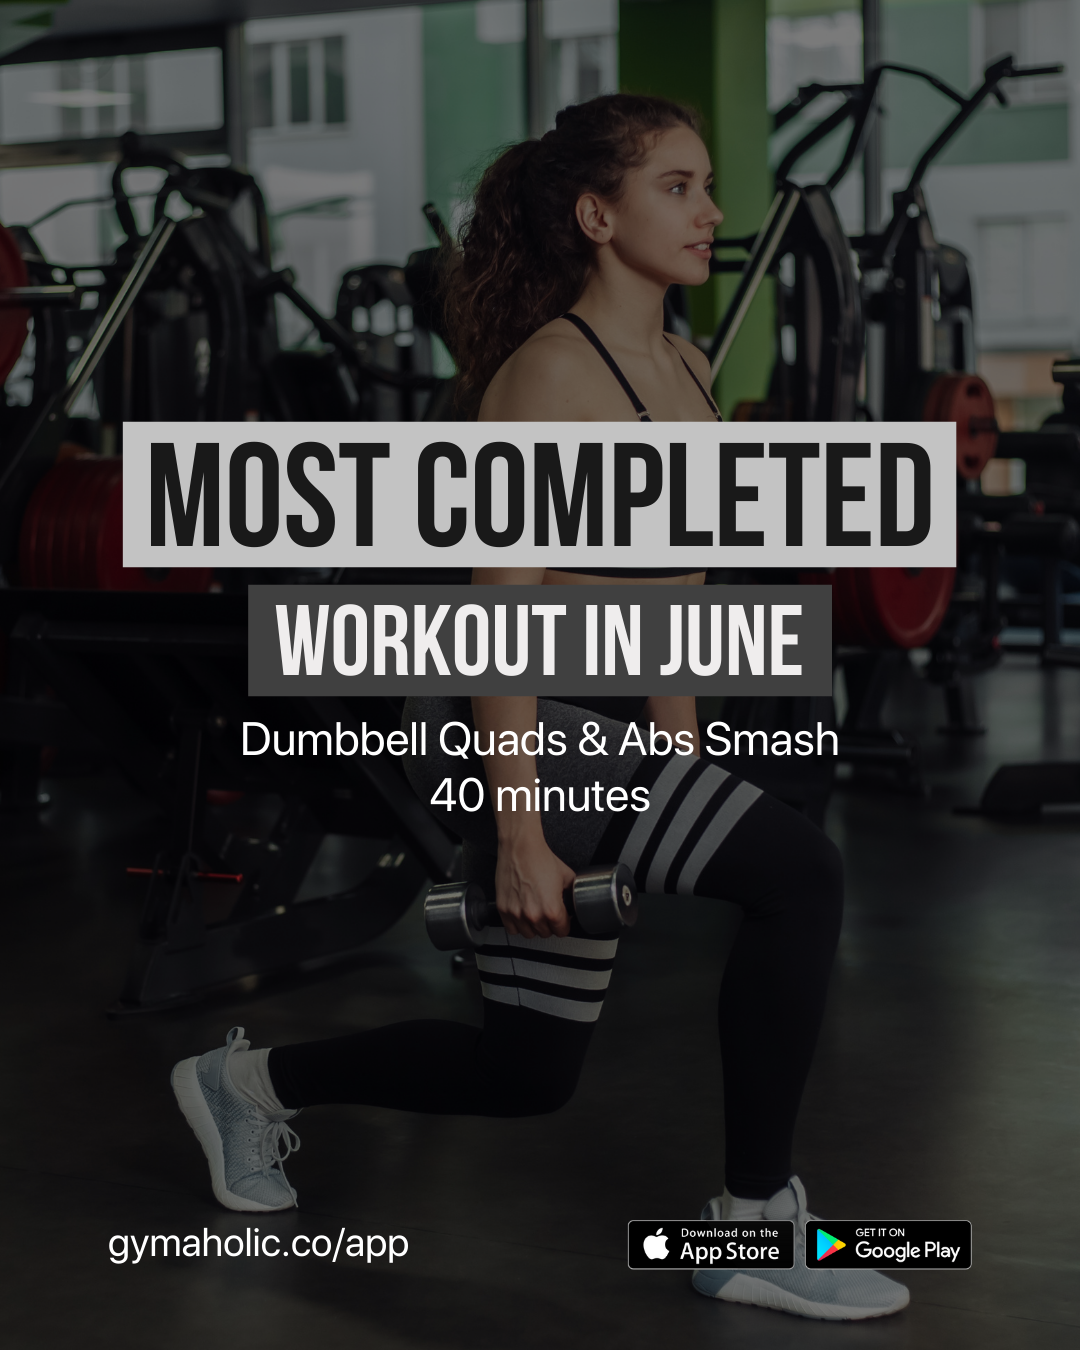 Most completed workout in June